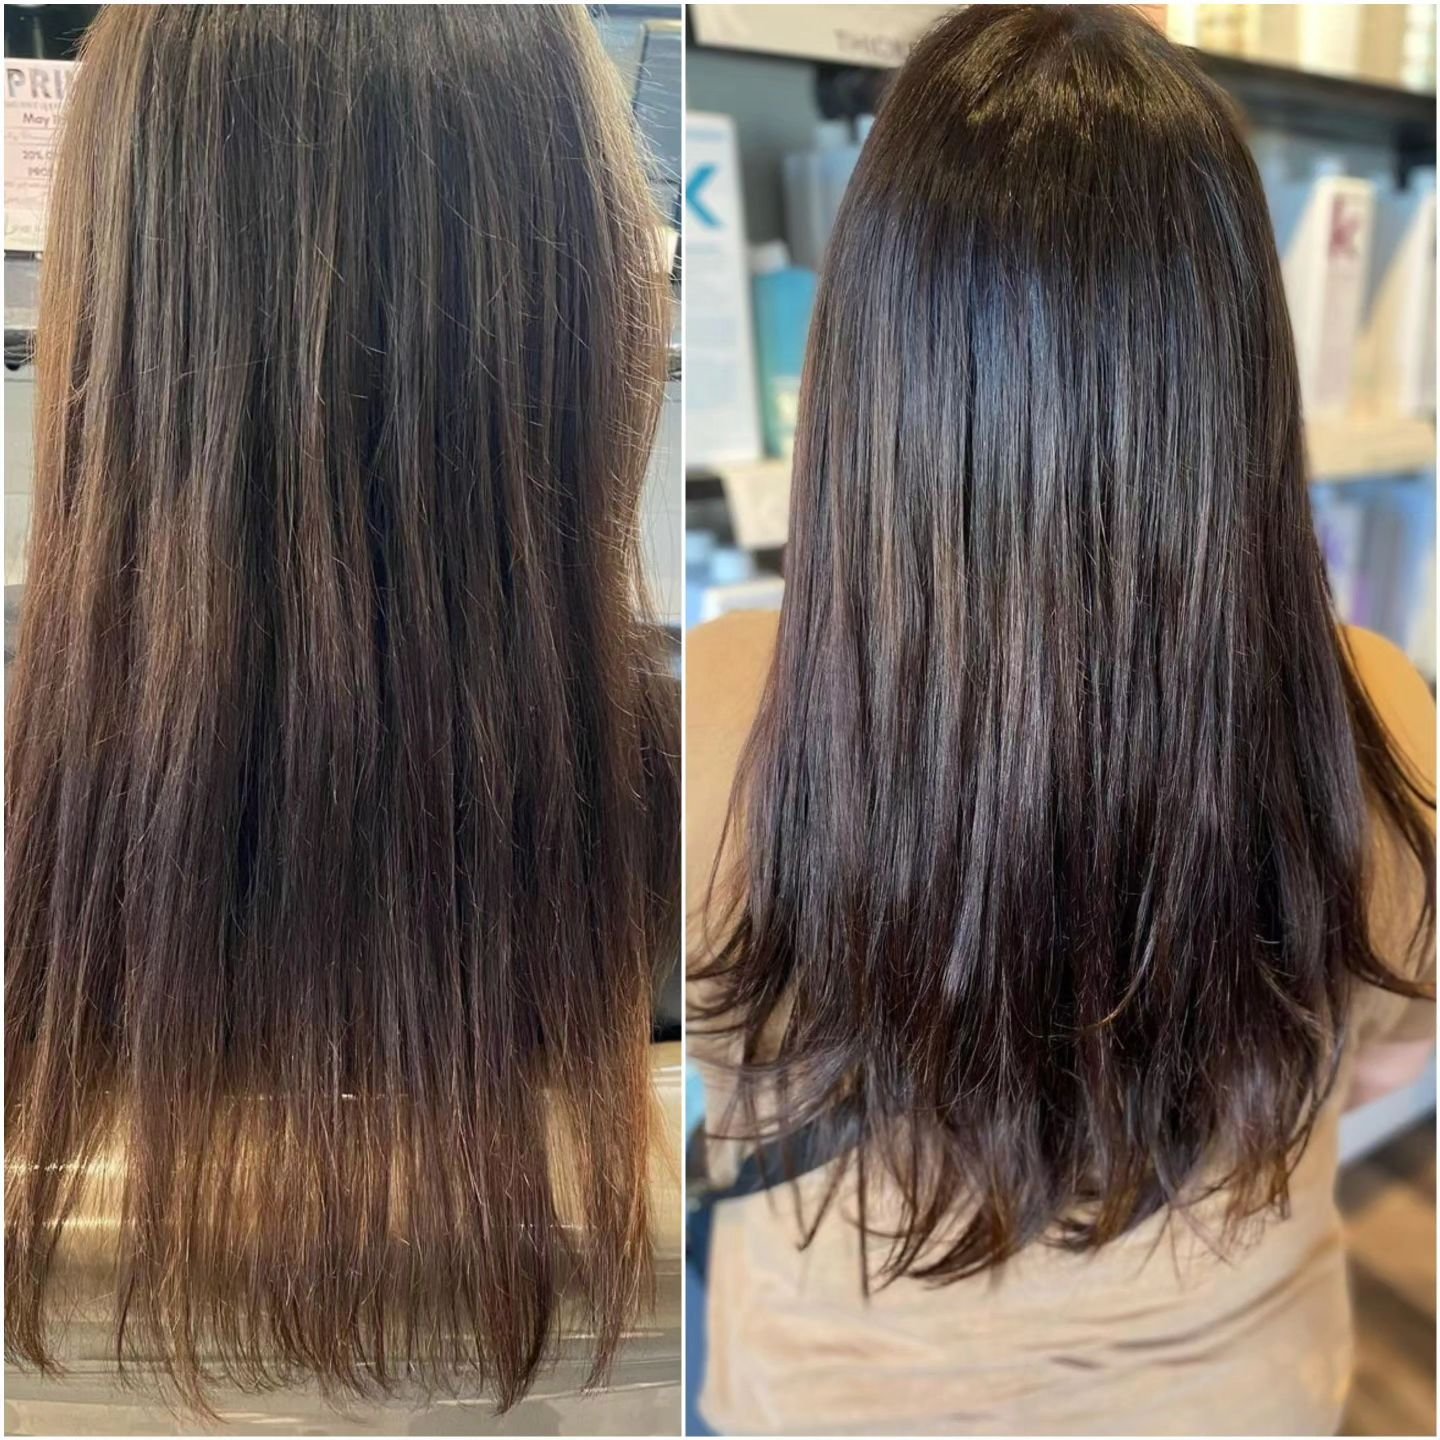 We are loving this before and ➡️ after 
@hairtalkusa keratin extension install by @hairbyjess.winonamn. She added them for fullness and a little length🤩
#luxehairwinona #winonamnhair #luxehairwinona #winonamnextensions